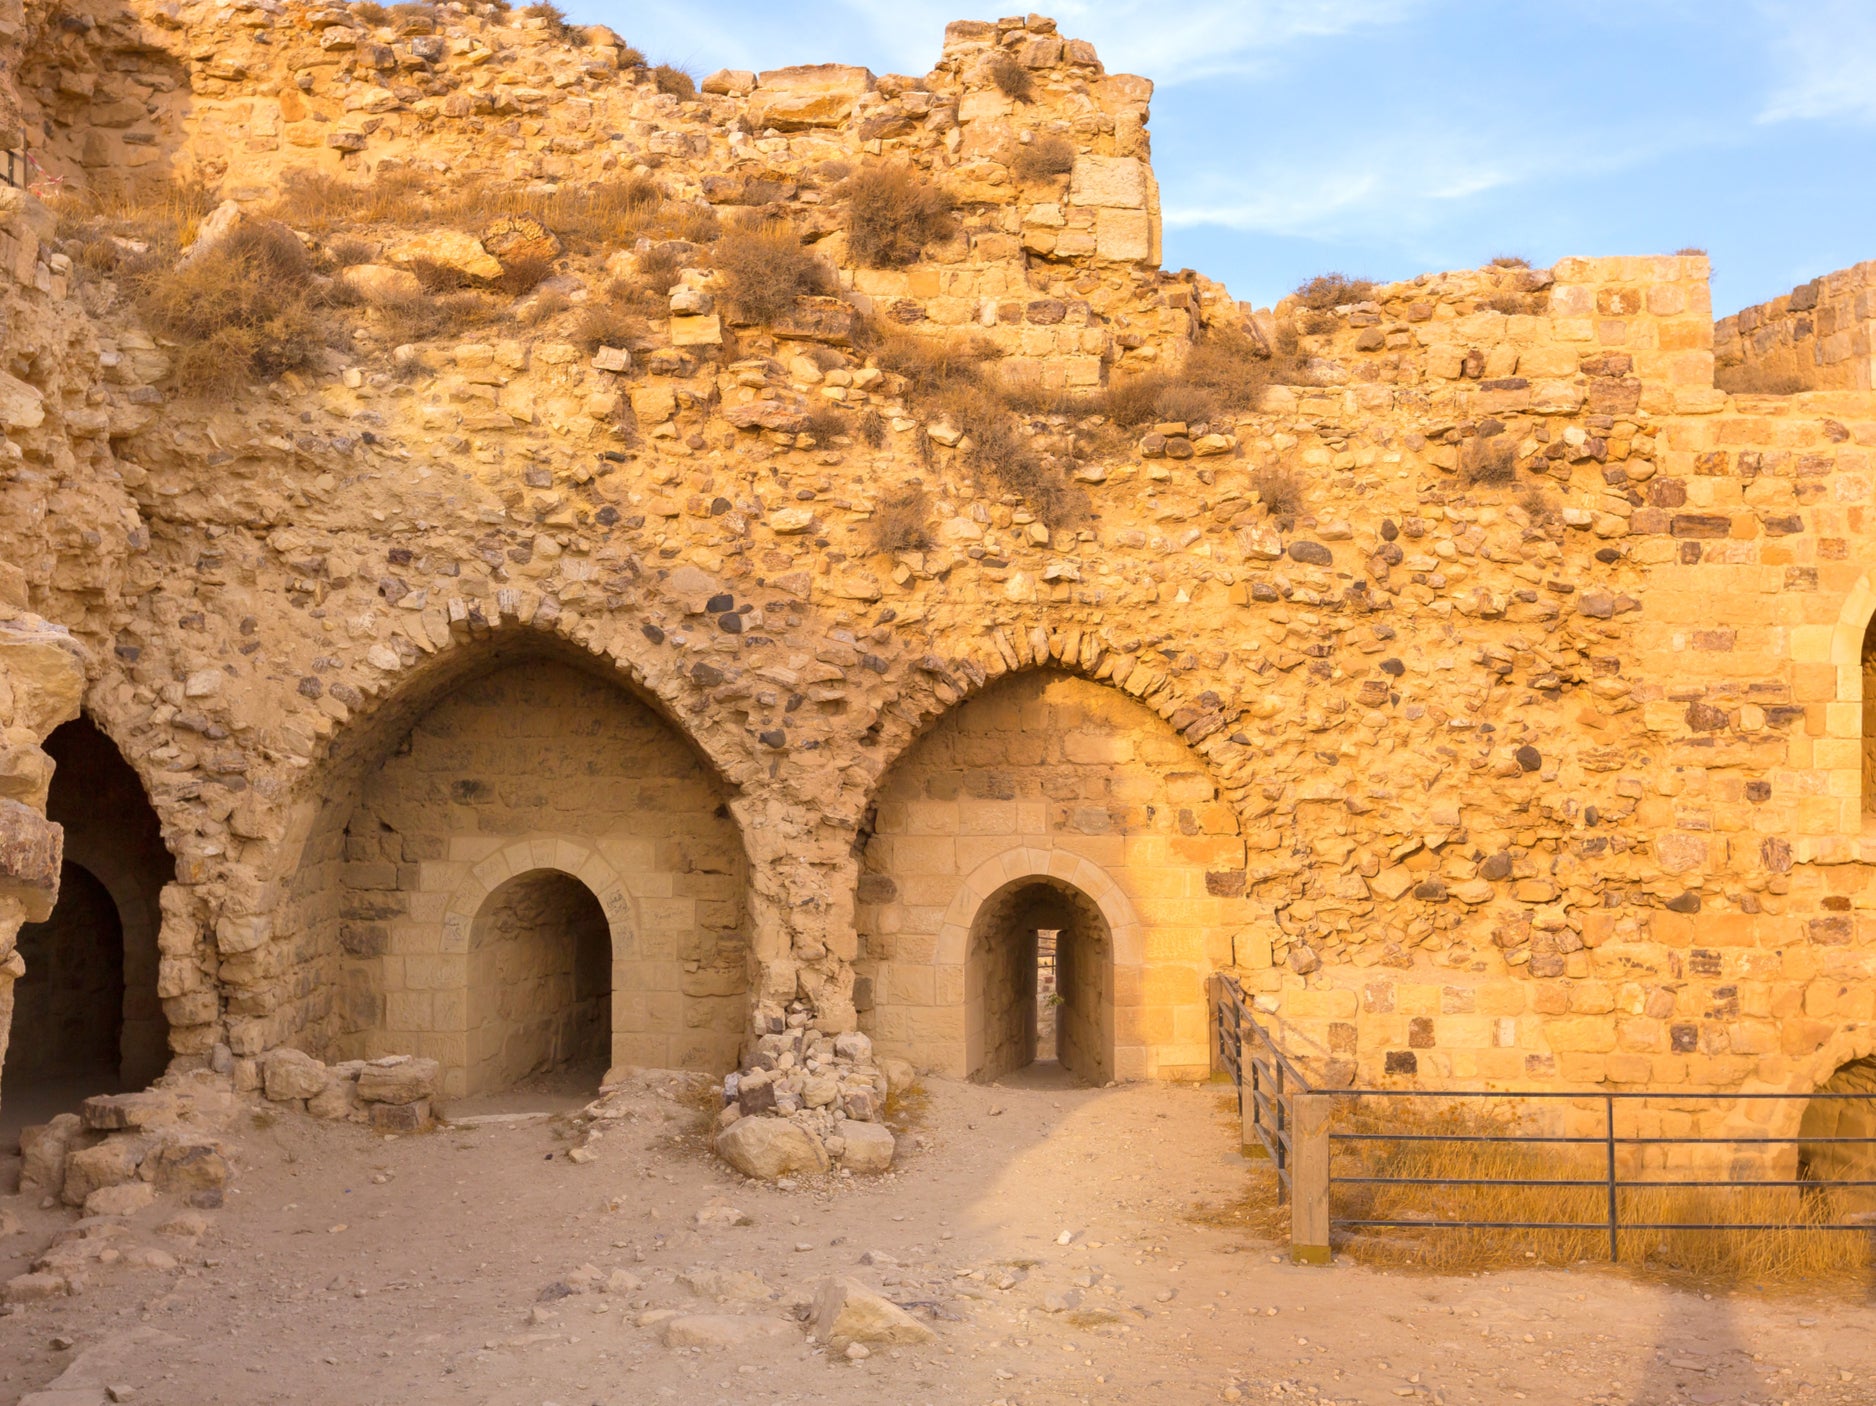 One of the largest Crusader castles can be found in Kerak